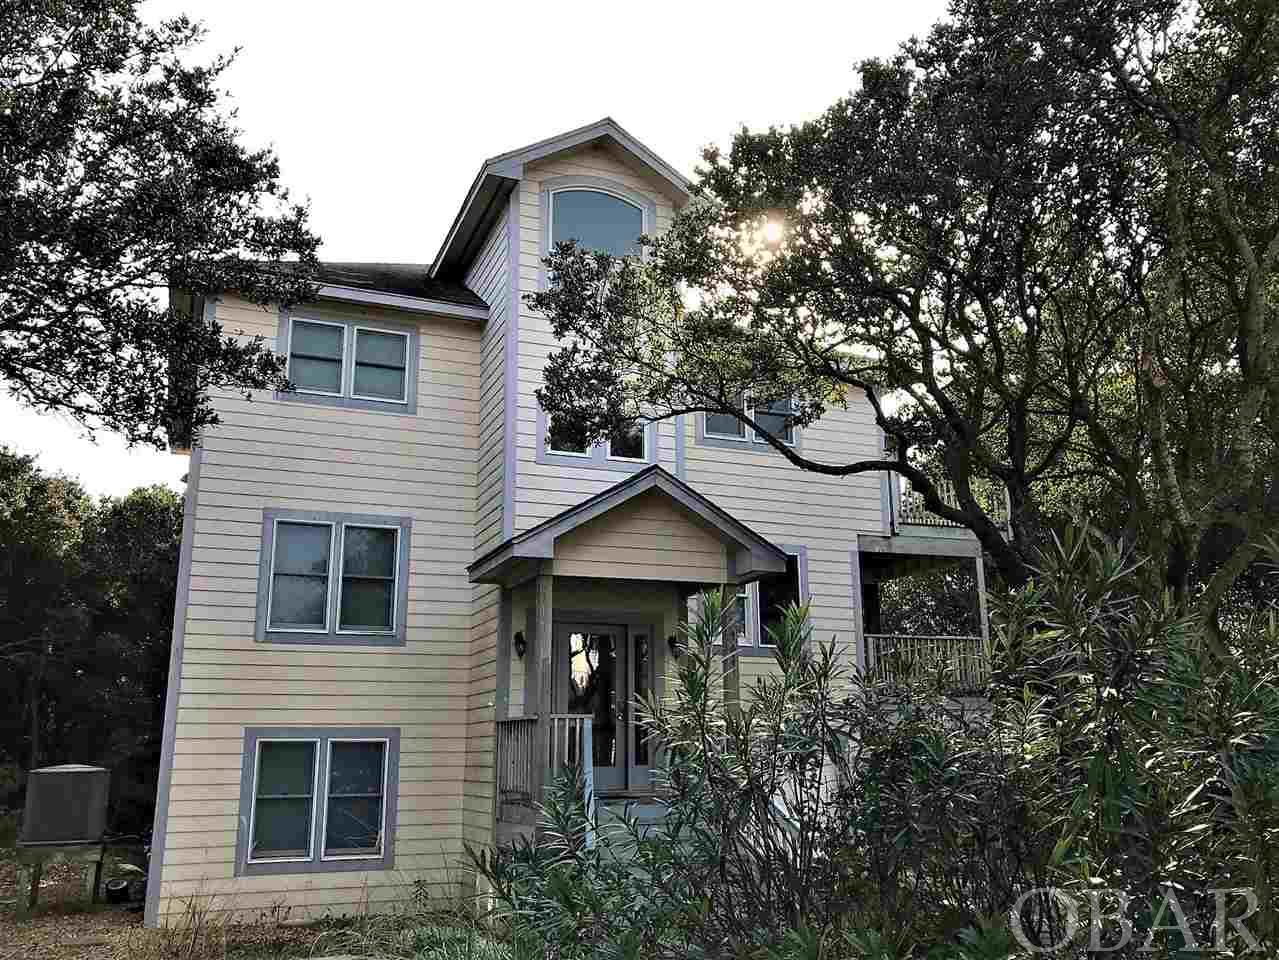 904 Emerald Court Lot 72 Outer Banks Home Listings - Holleay Parcker - Spinnaker Realty Outer Banks (OBX) Real Estate